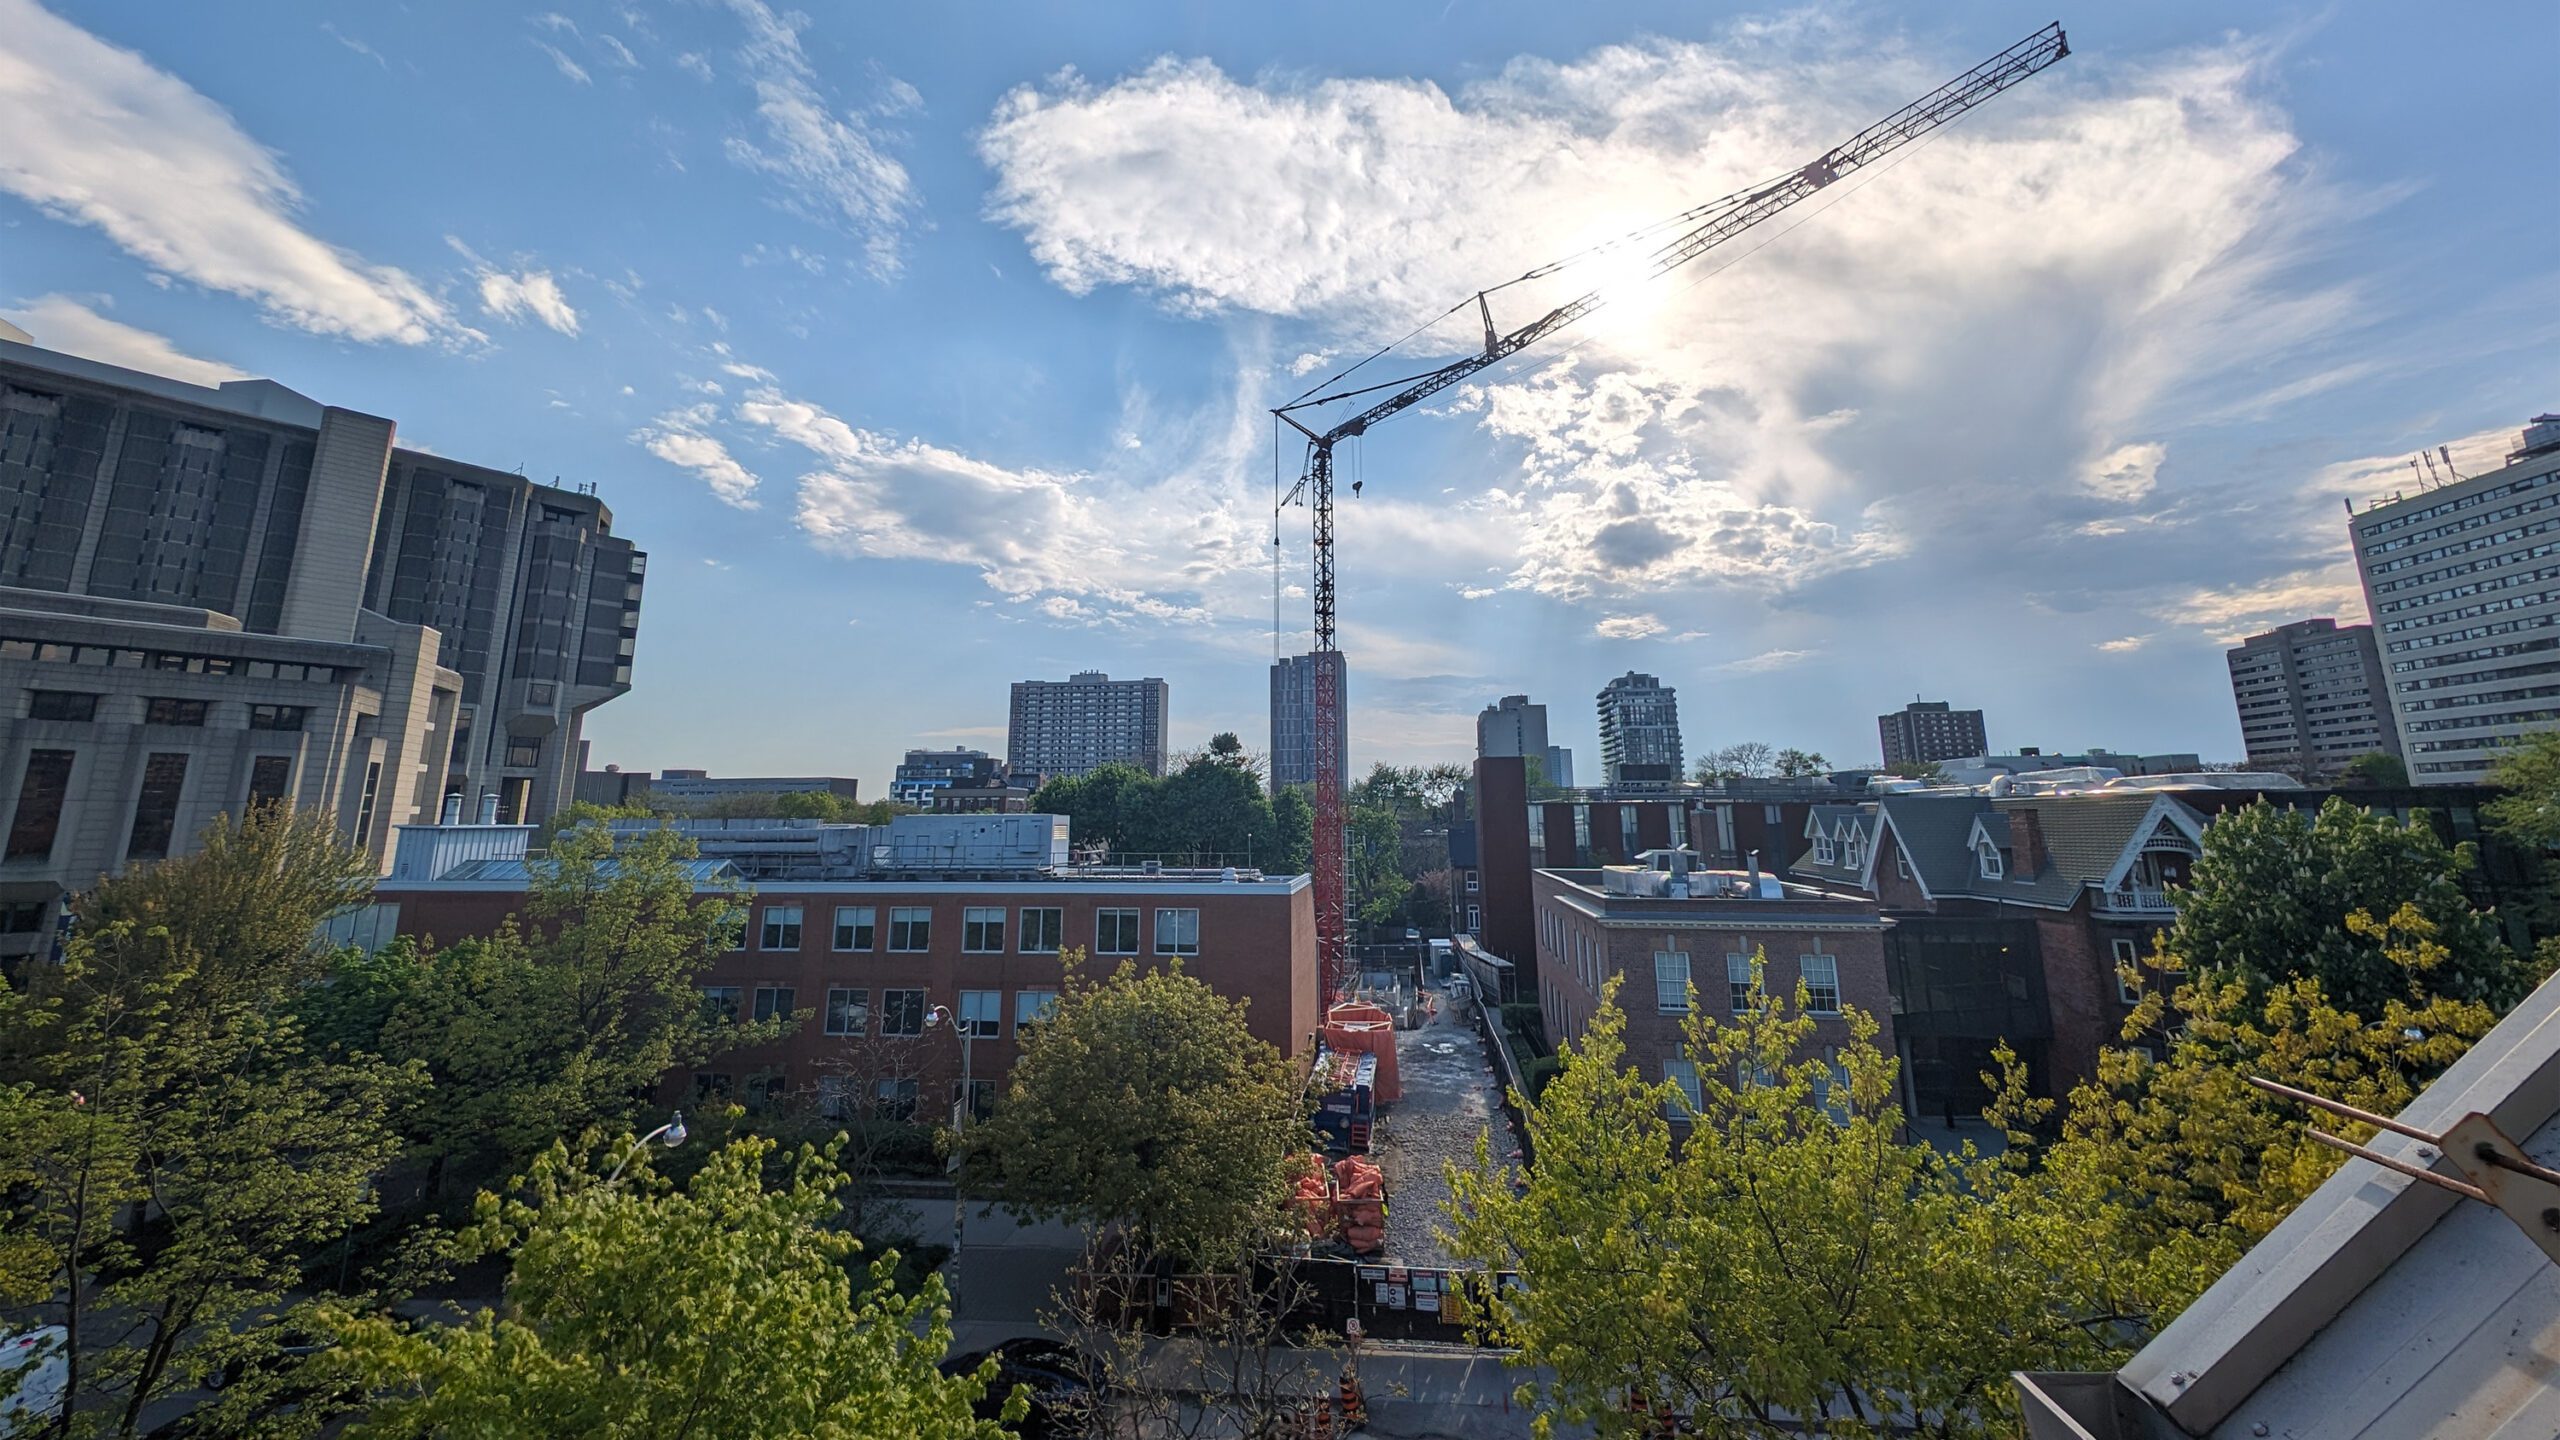 west-facing view of Innis College, as seen from upper-level of Innis Residence, showing construction crane.